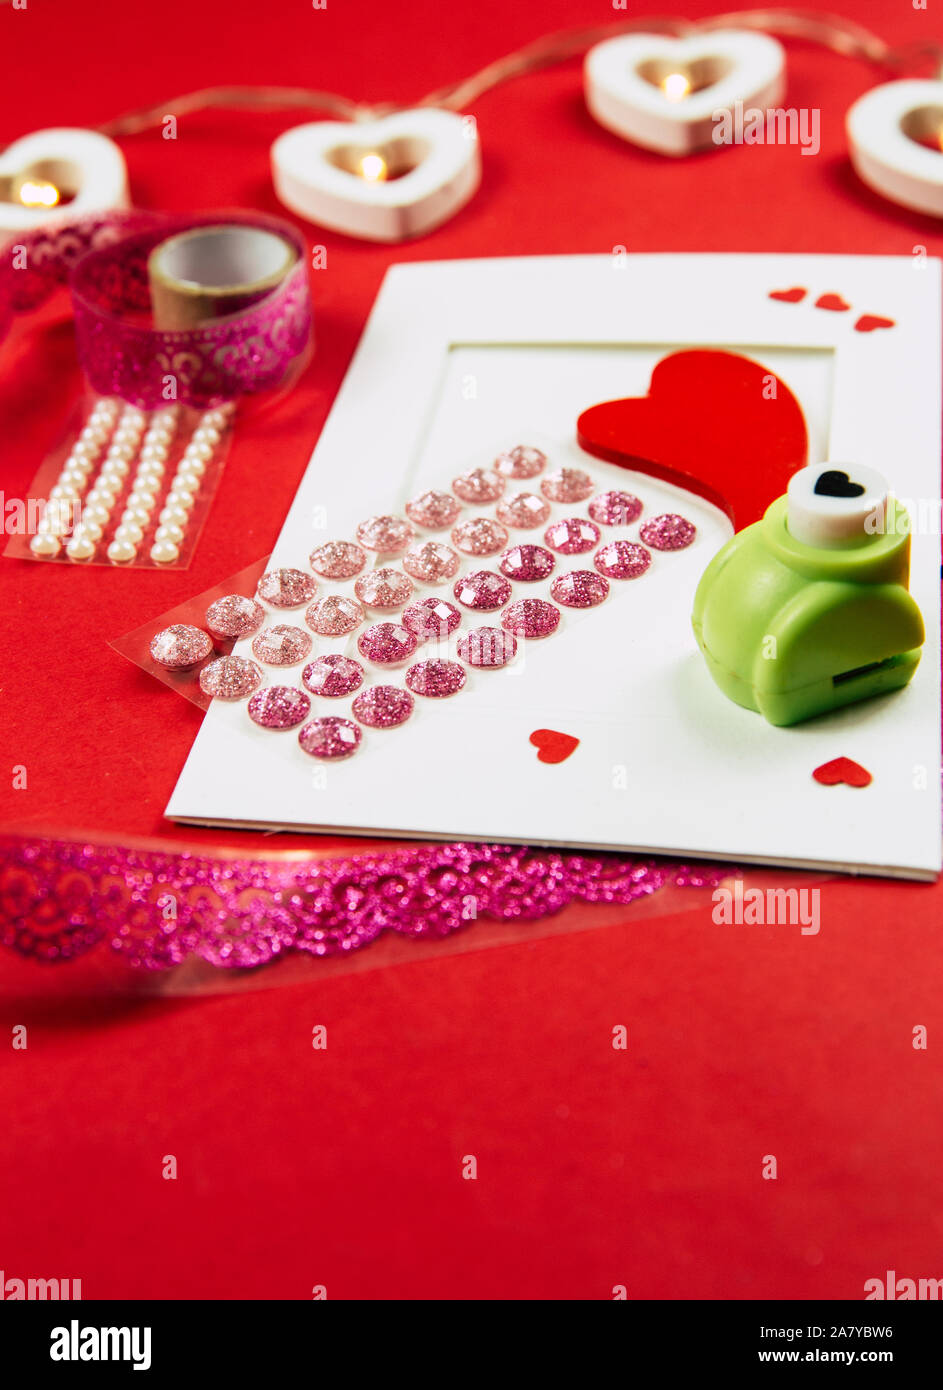 Making Greetings card concept. Various arts and crafts tools on table, red background. Stock Photo